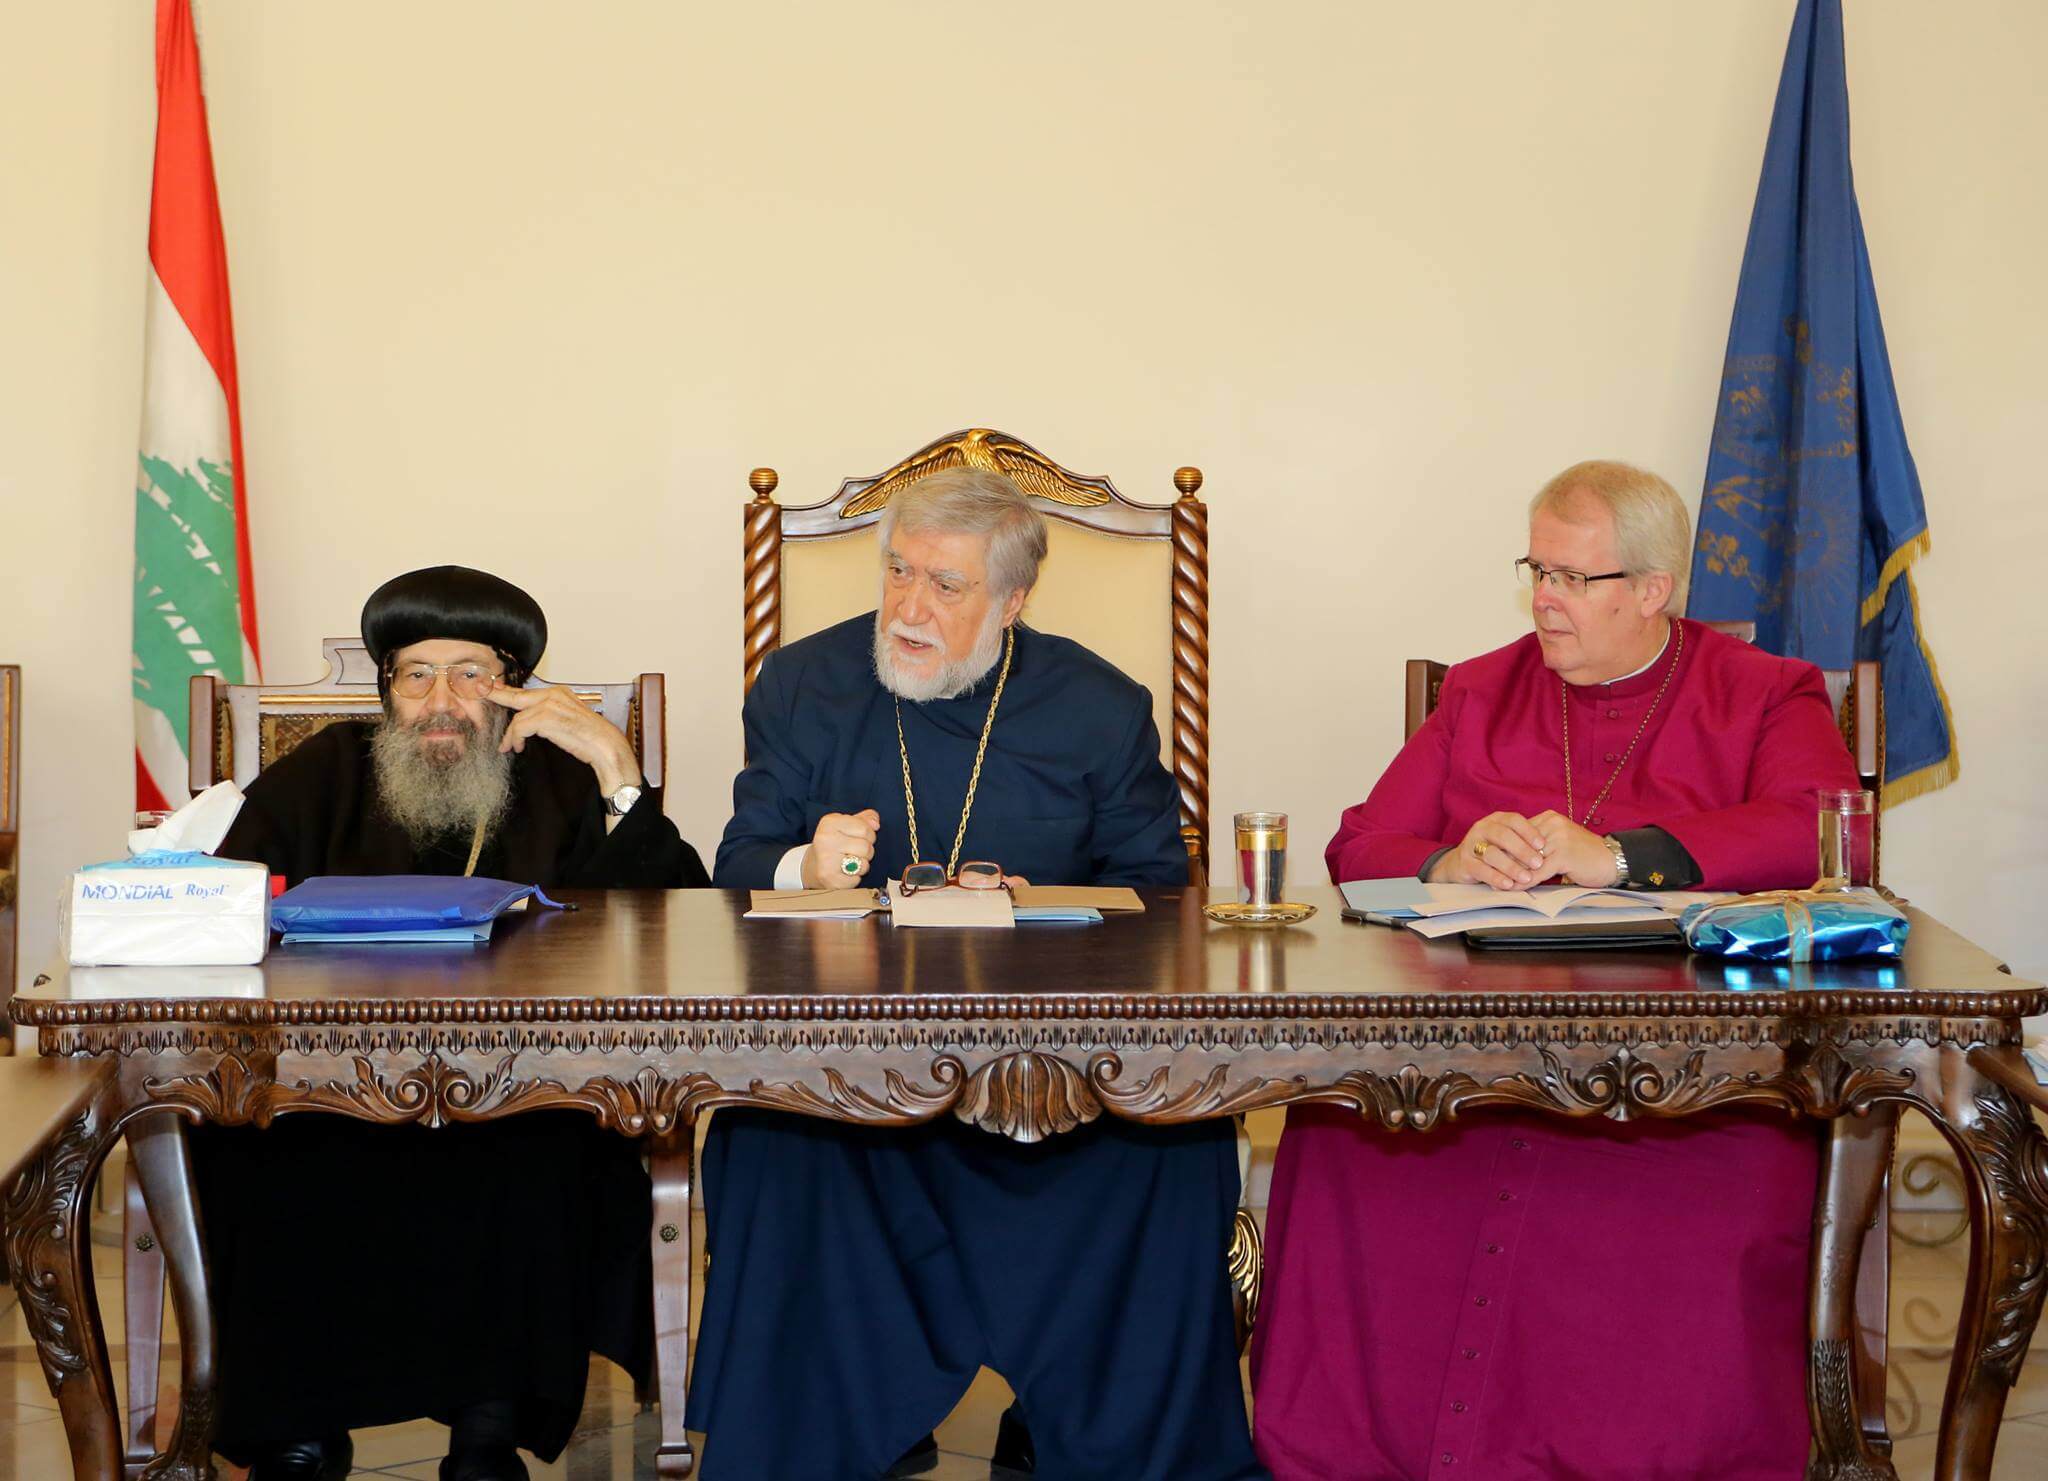 “THE ECUMENICAL MOVEMENT IS IN DANGER OF LOSING ITS IDENTITY AND VISION” HH ARAM I